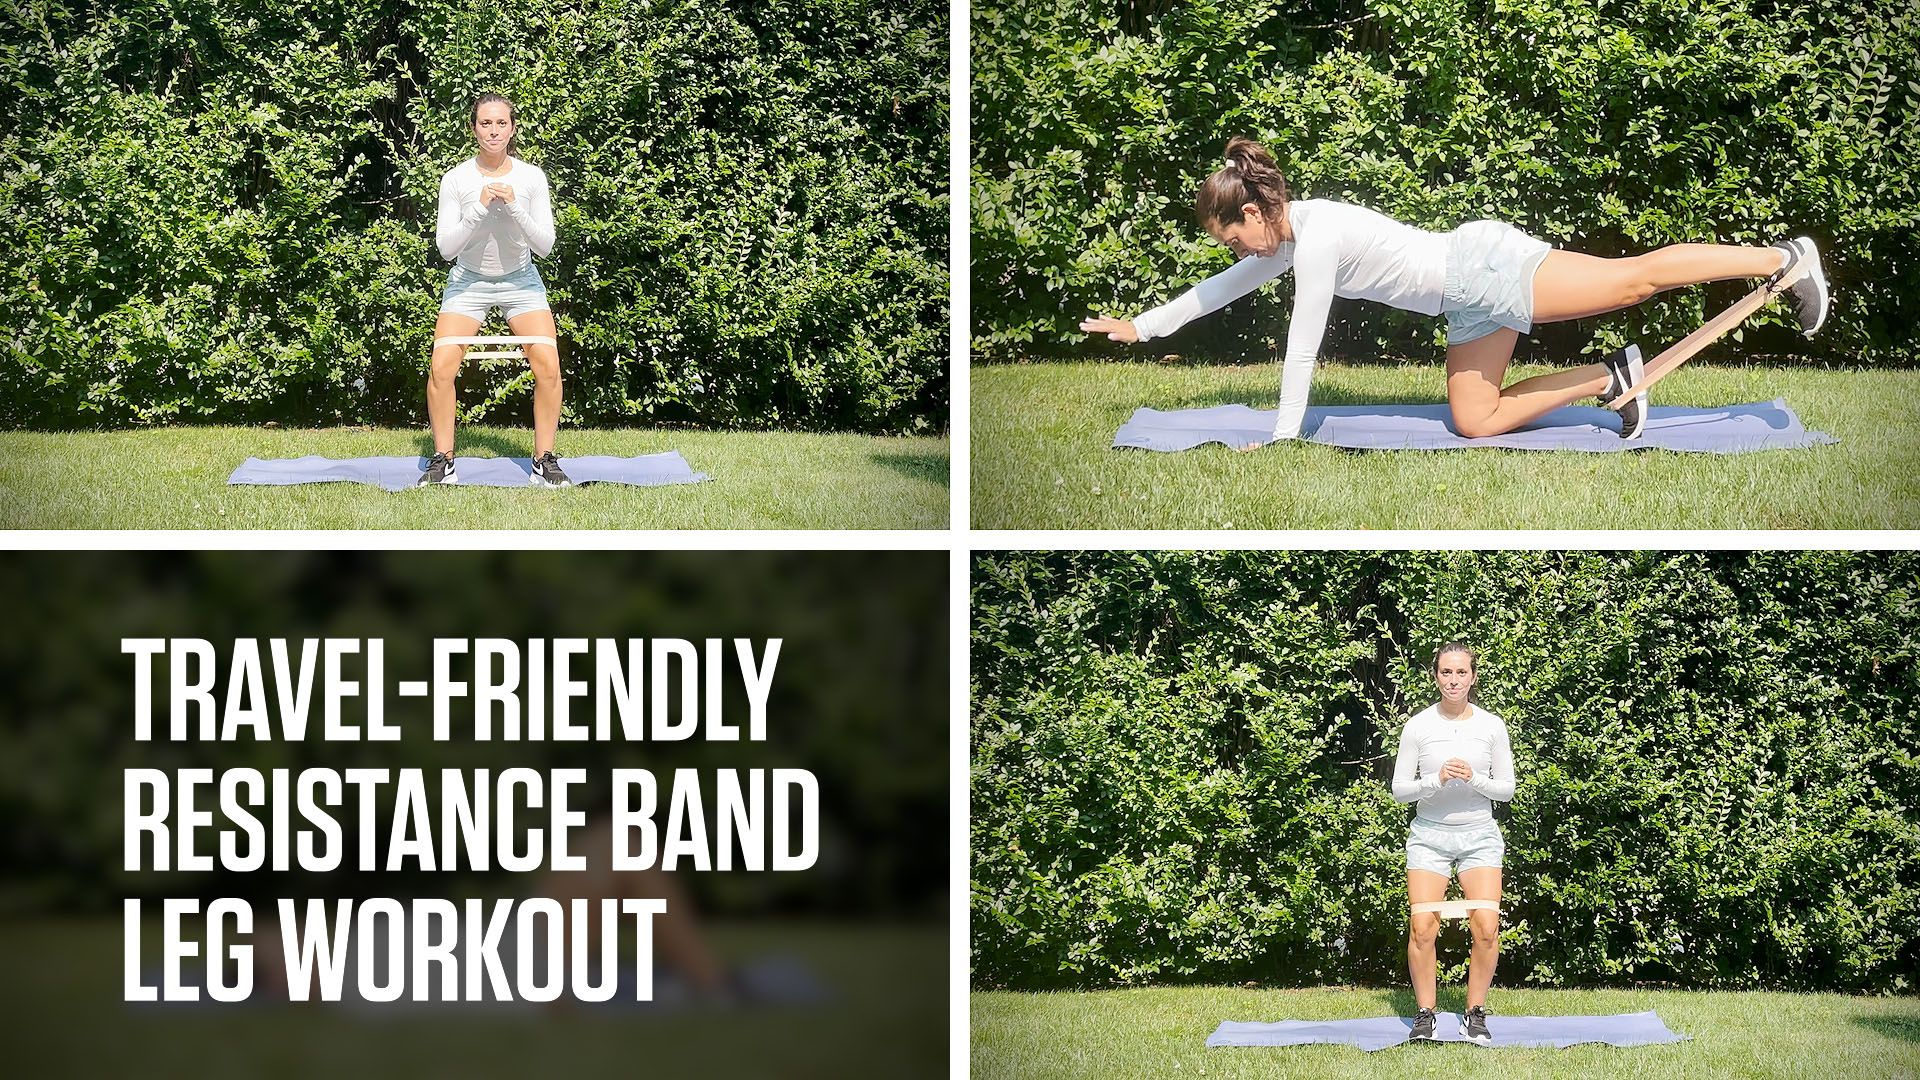 Resistance Band Ab Workout: 8 Resistance Band Core Exercises